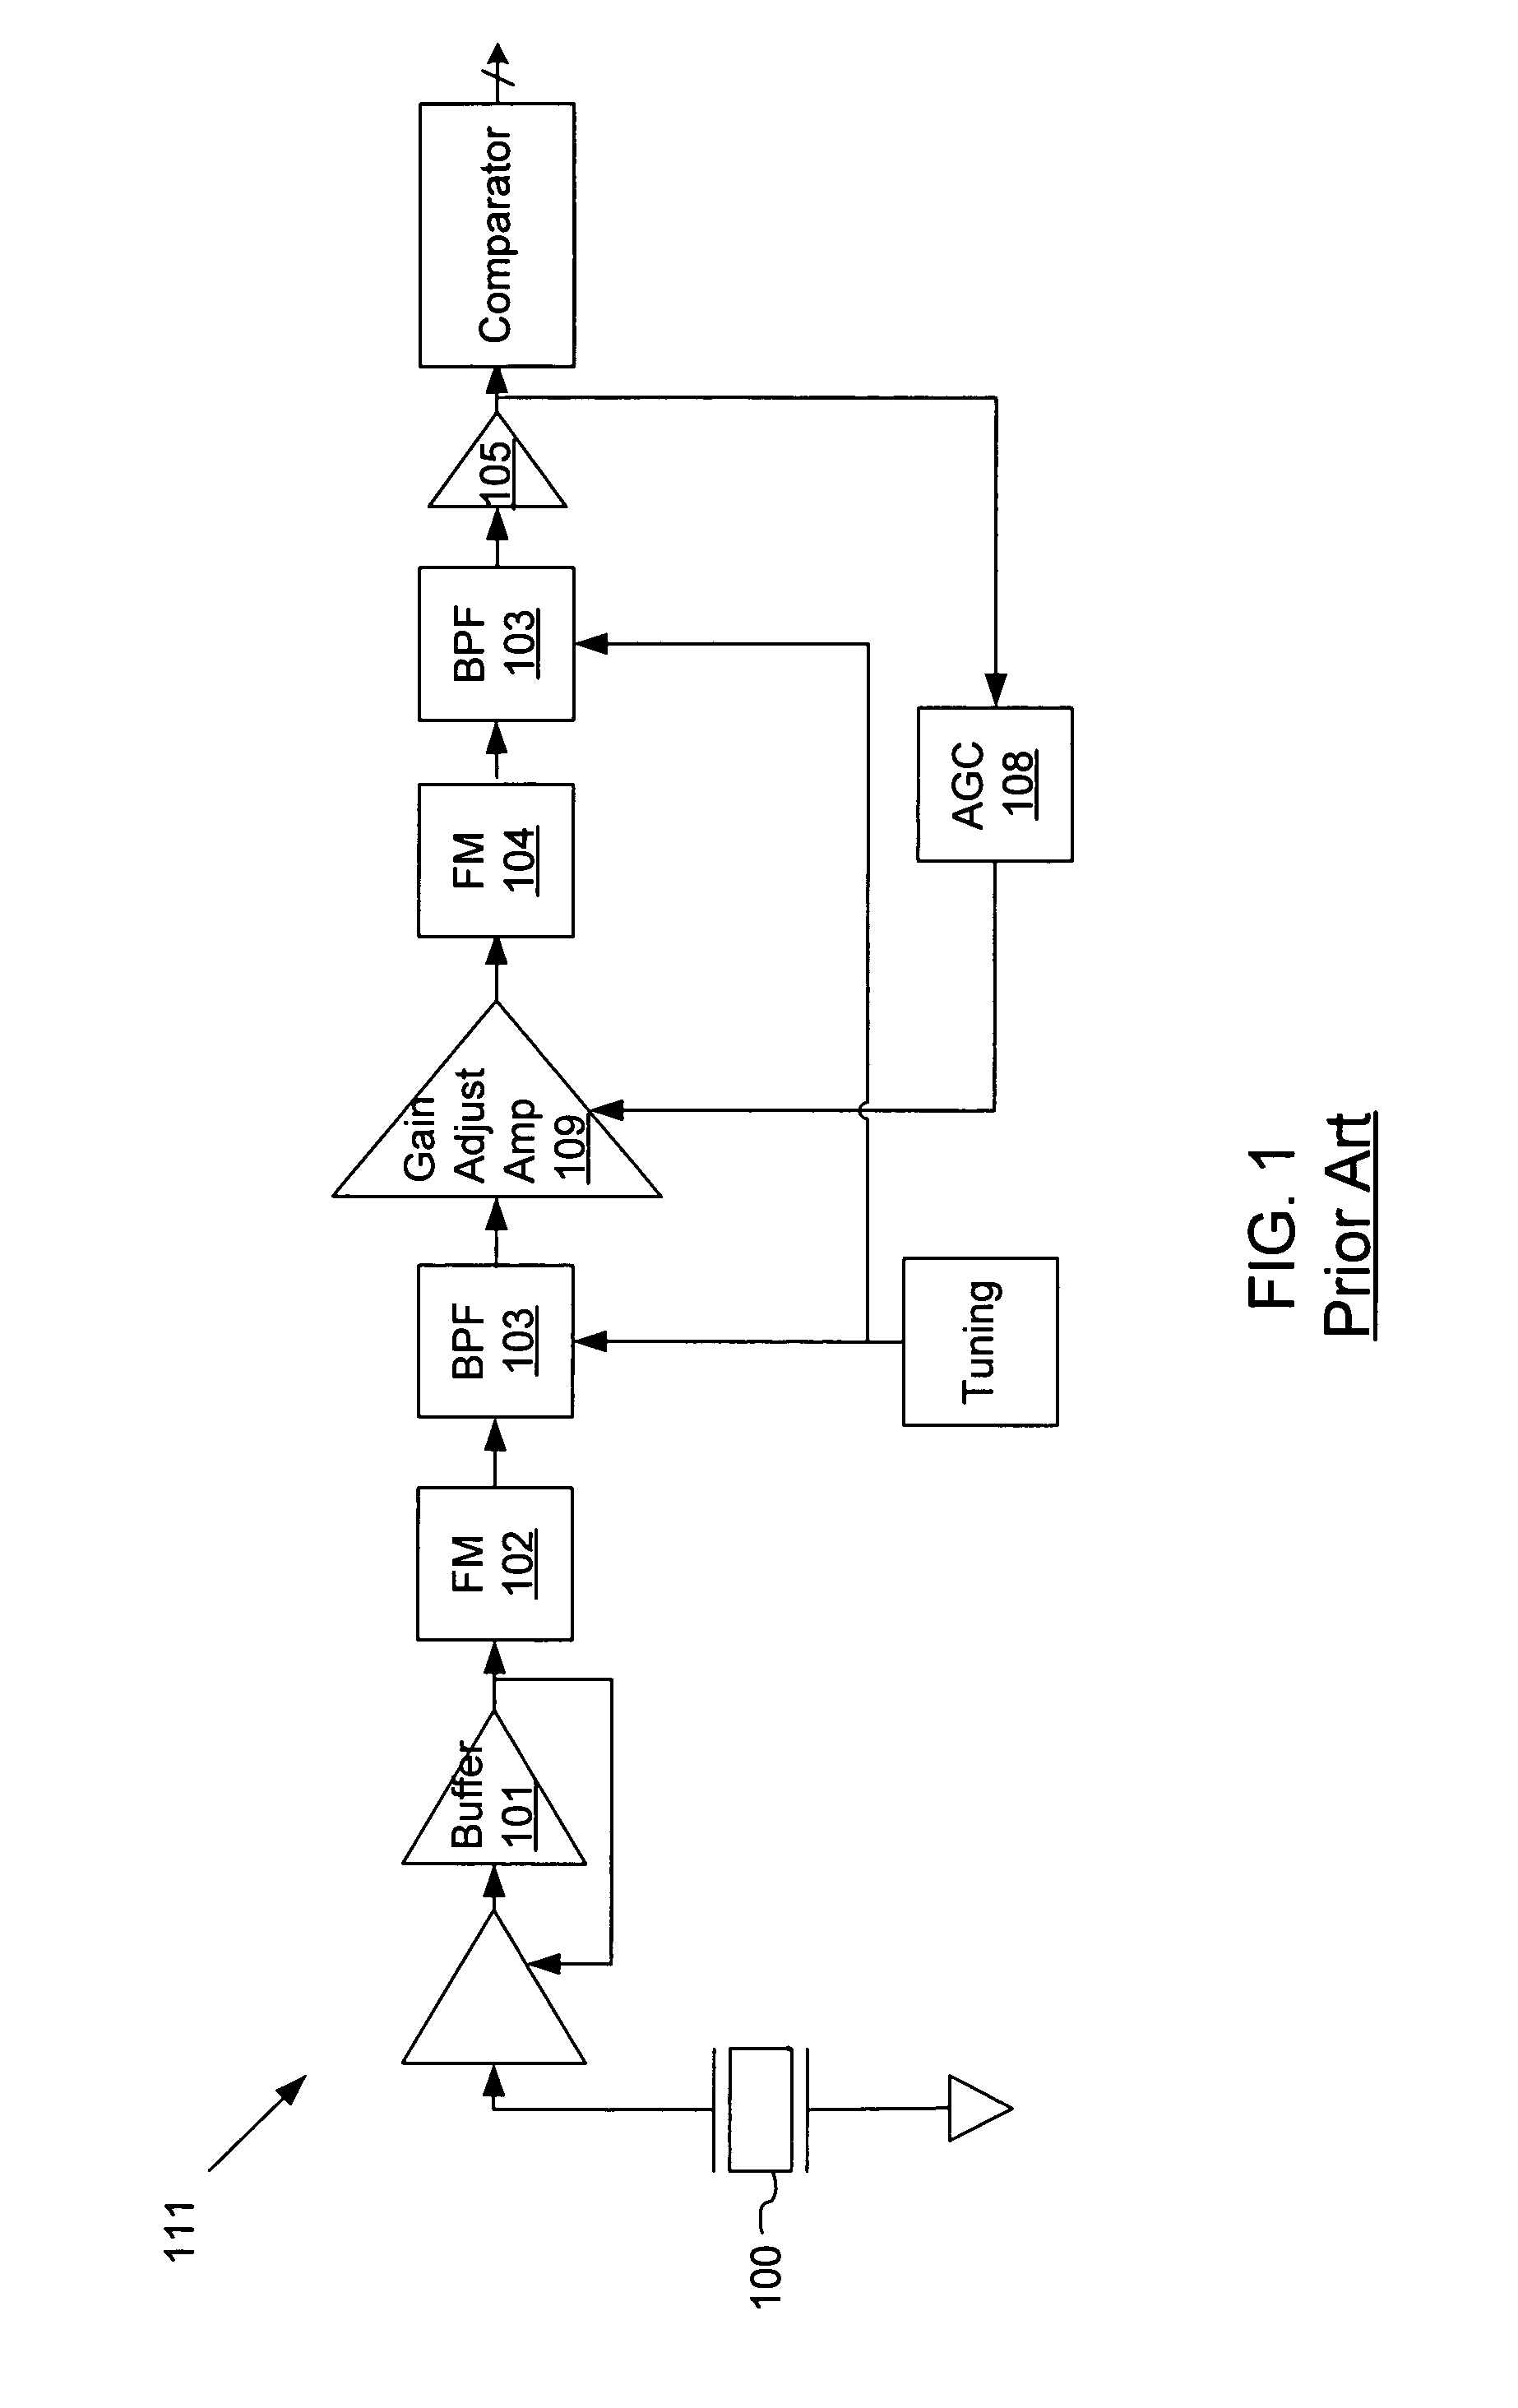 Systems and methods for generating an output oscillation signal with low jitter